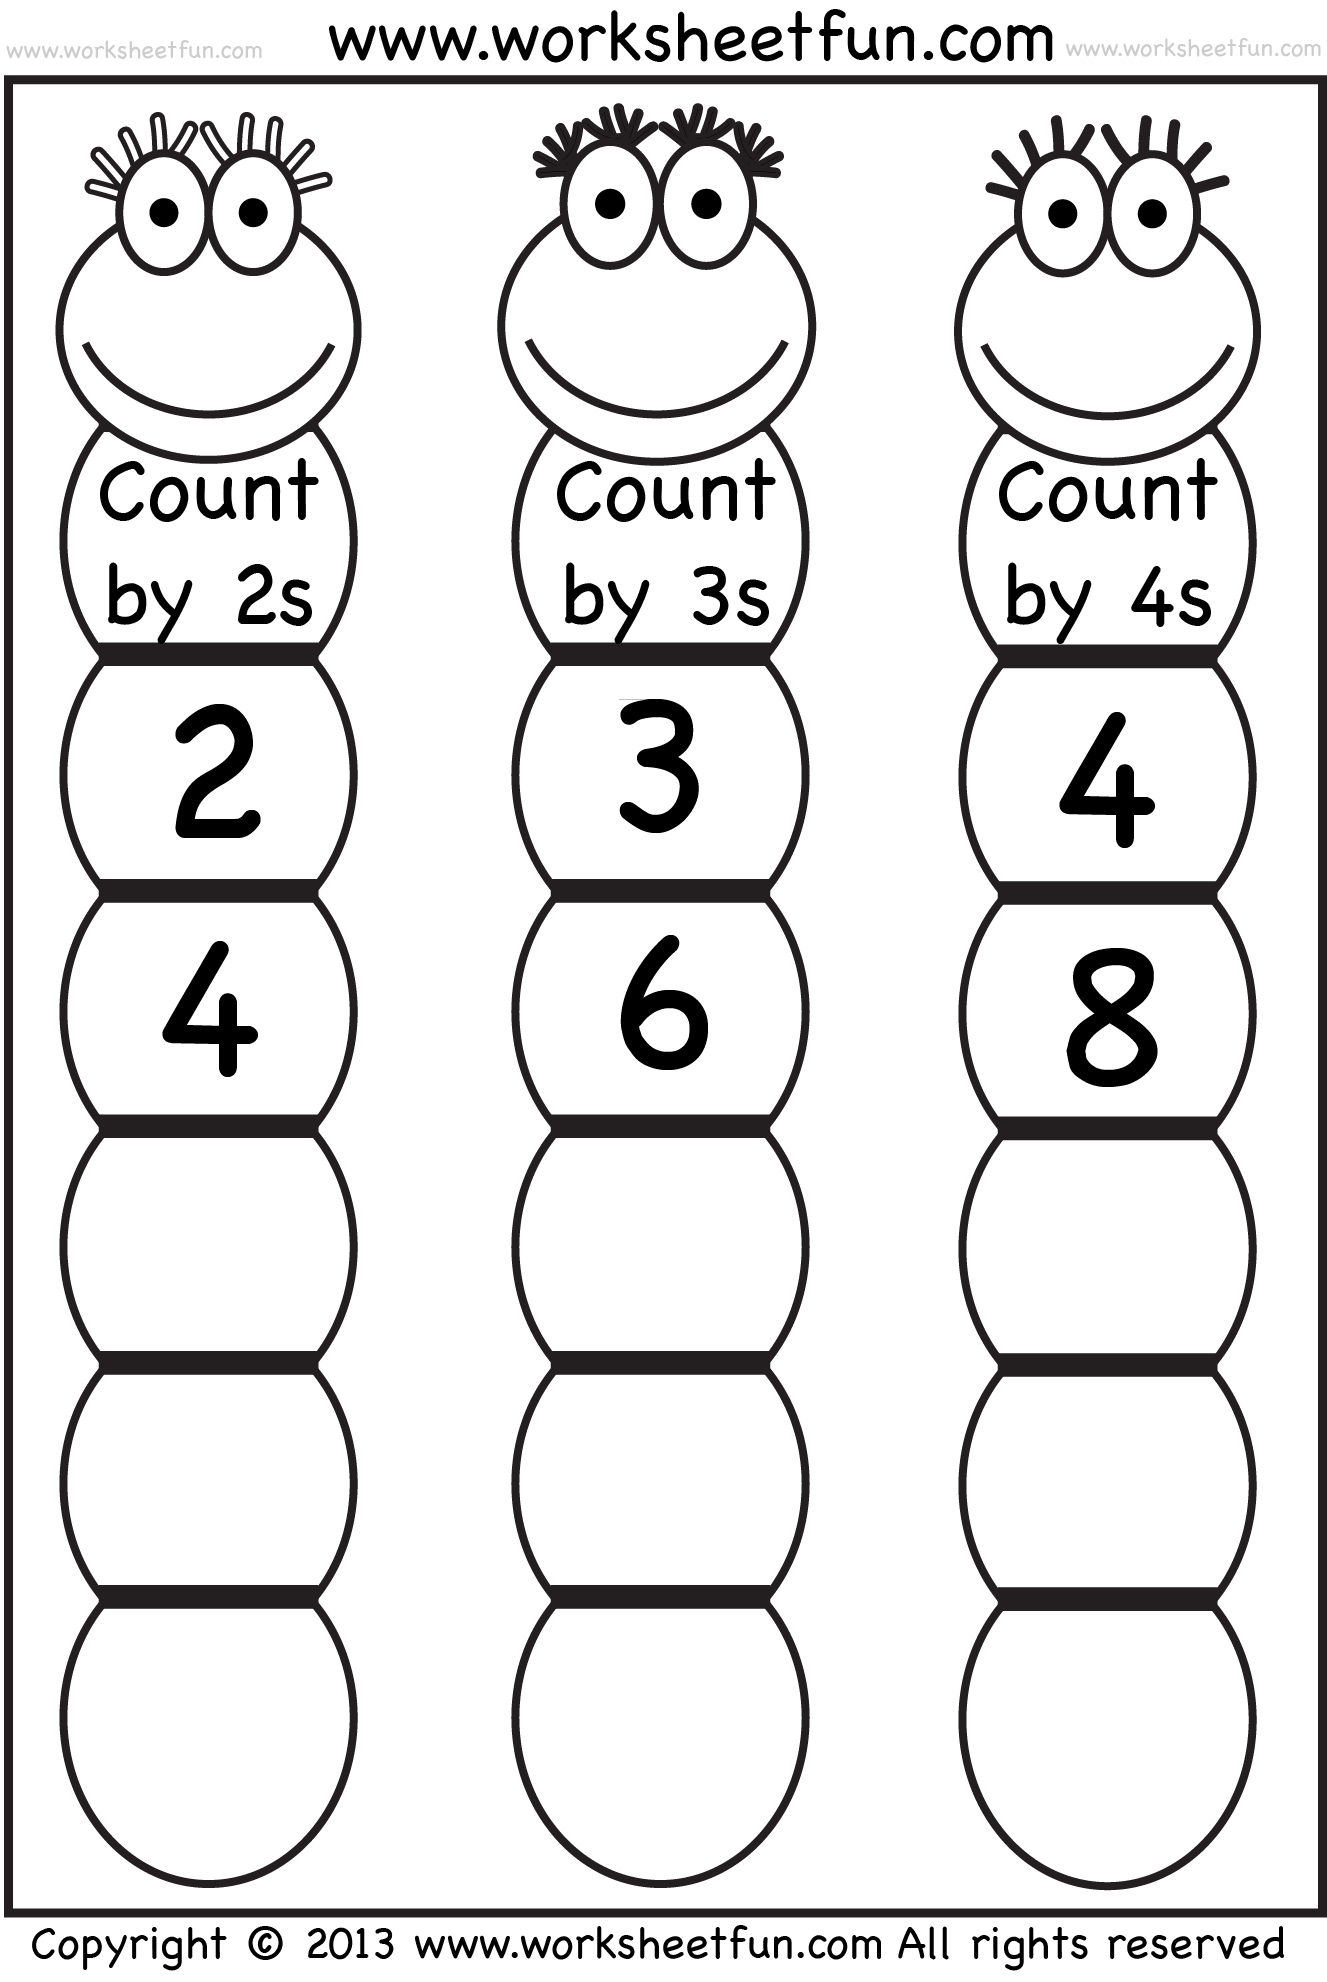 6-best-images-of-printable-count-by-2-worksheets-skip-counting-by-2s